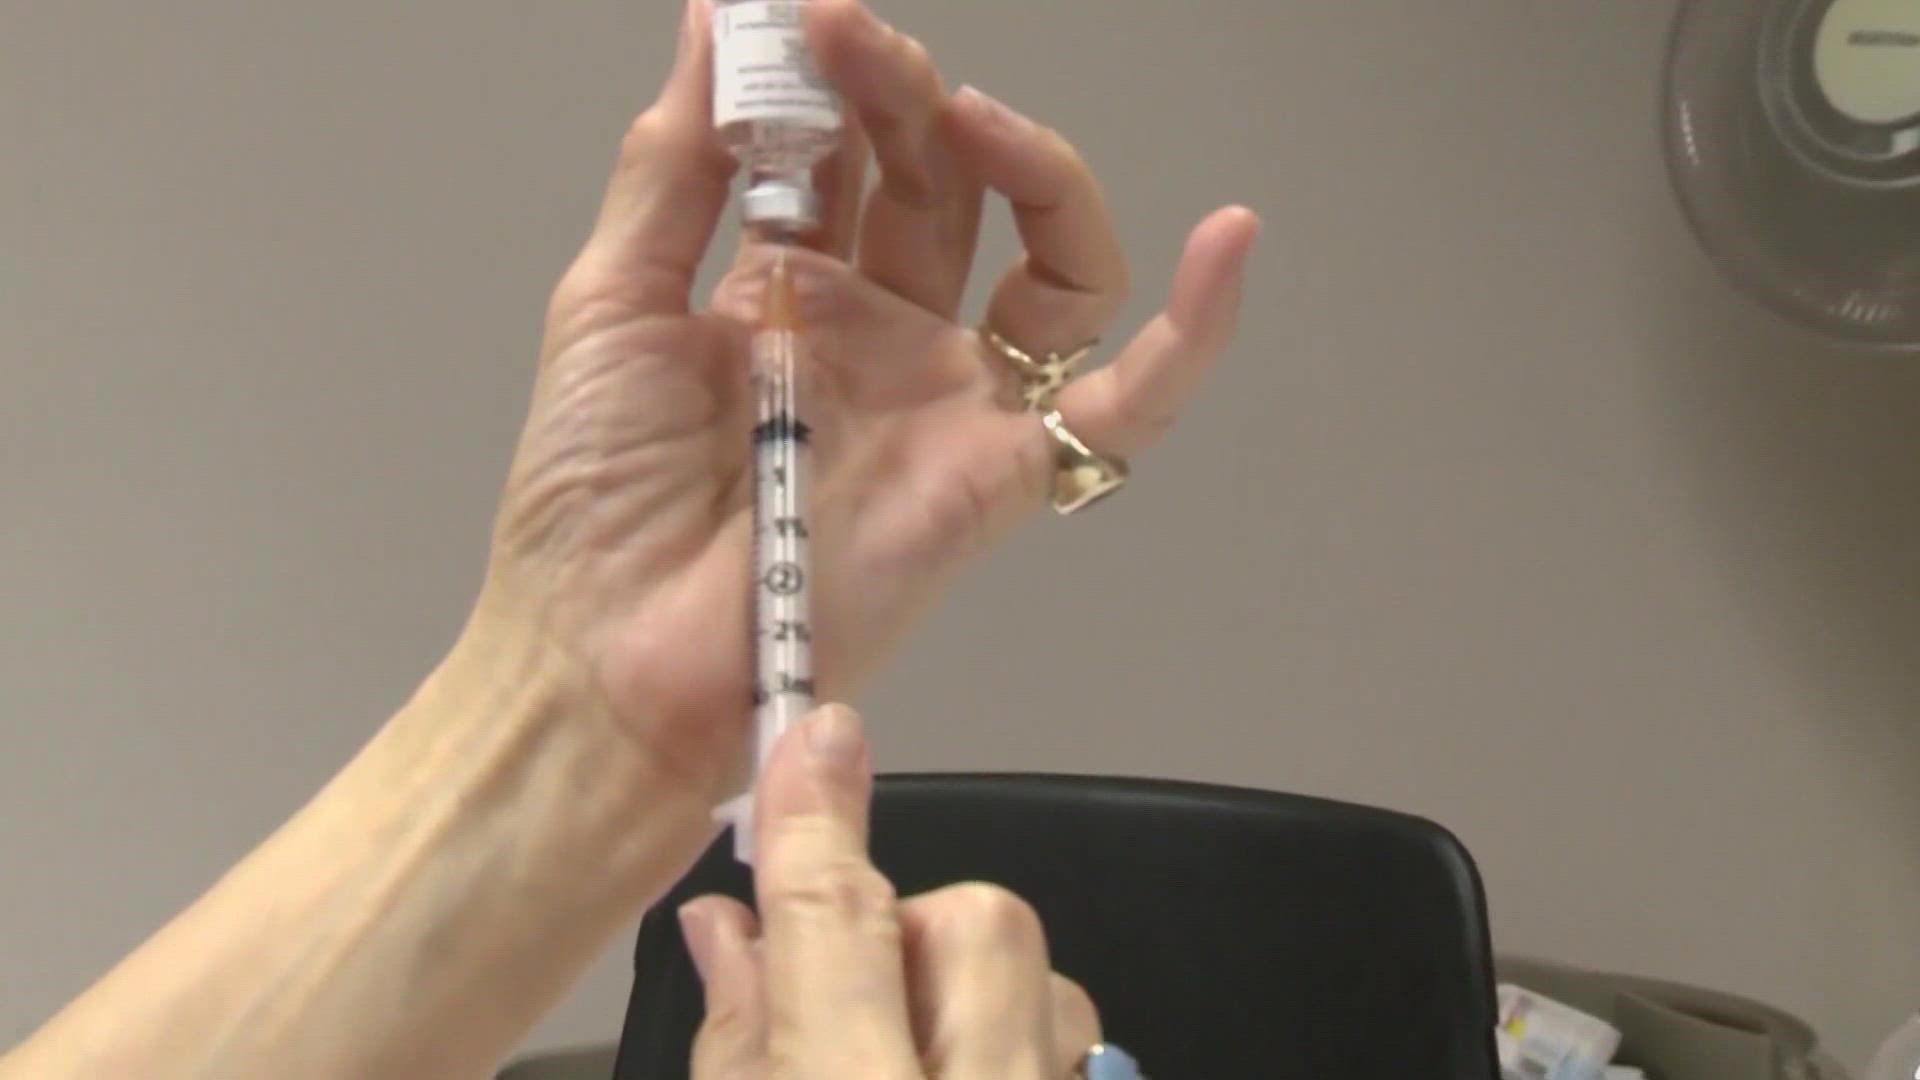 A Greensboro pediatrician says the pandemic and skepticism about vaccines play into the low immunization rate.